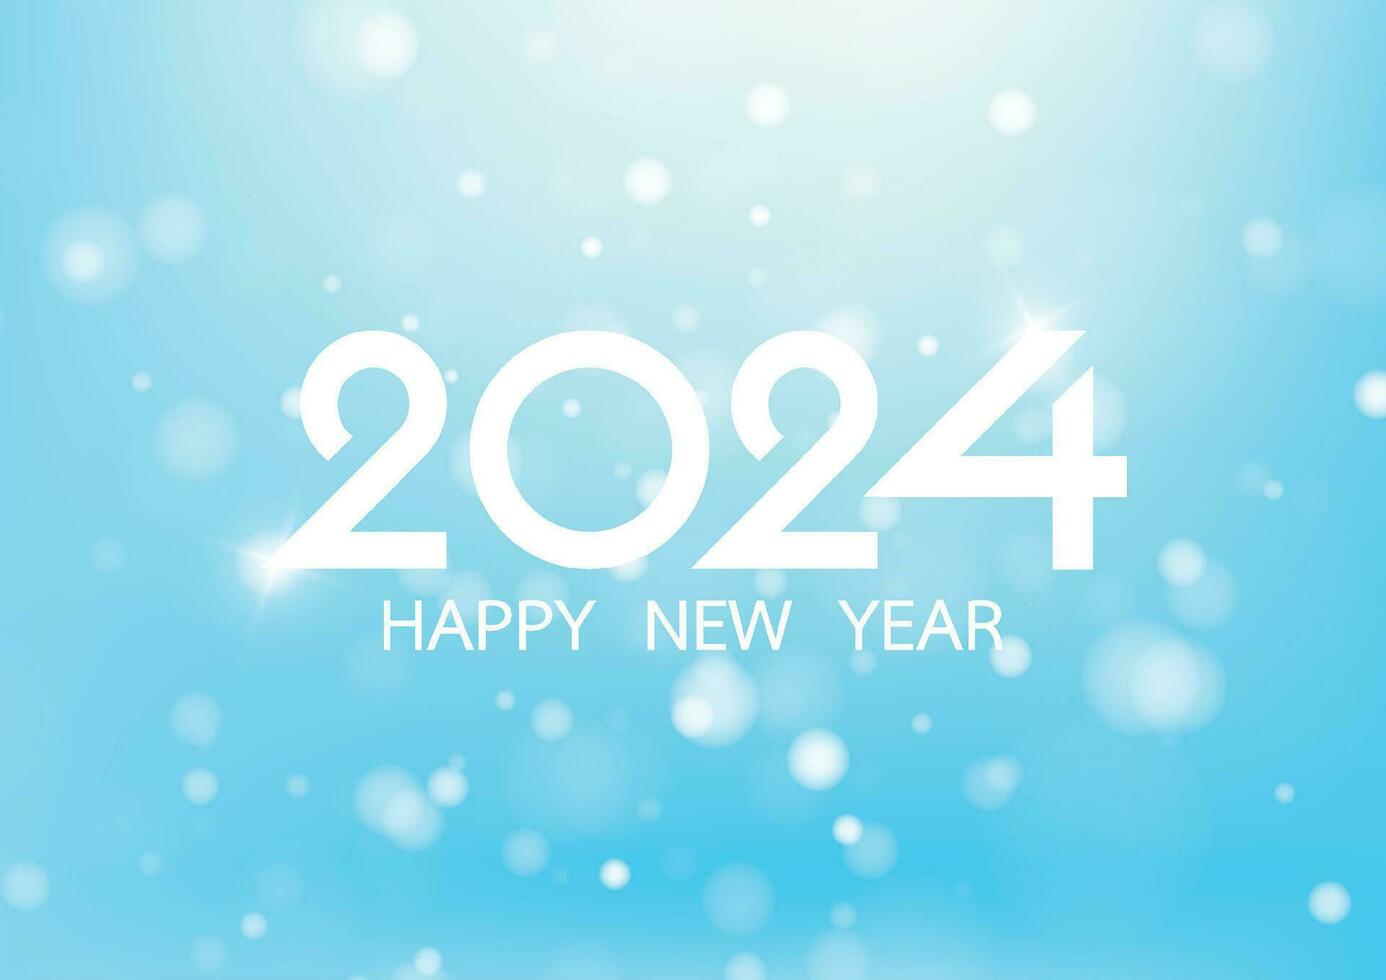 Happy new year 2024 on blue background for celebration, party, and new year event. Vector illustration